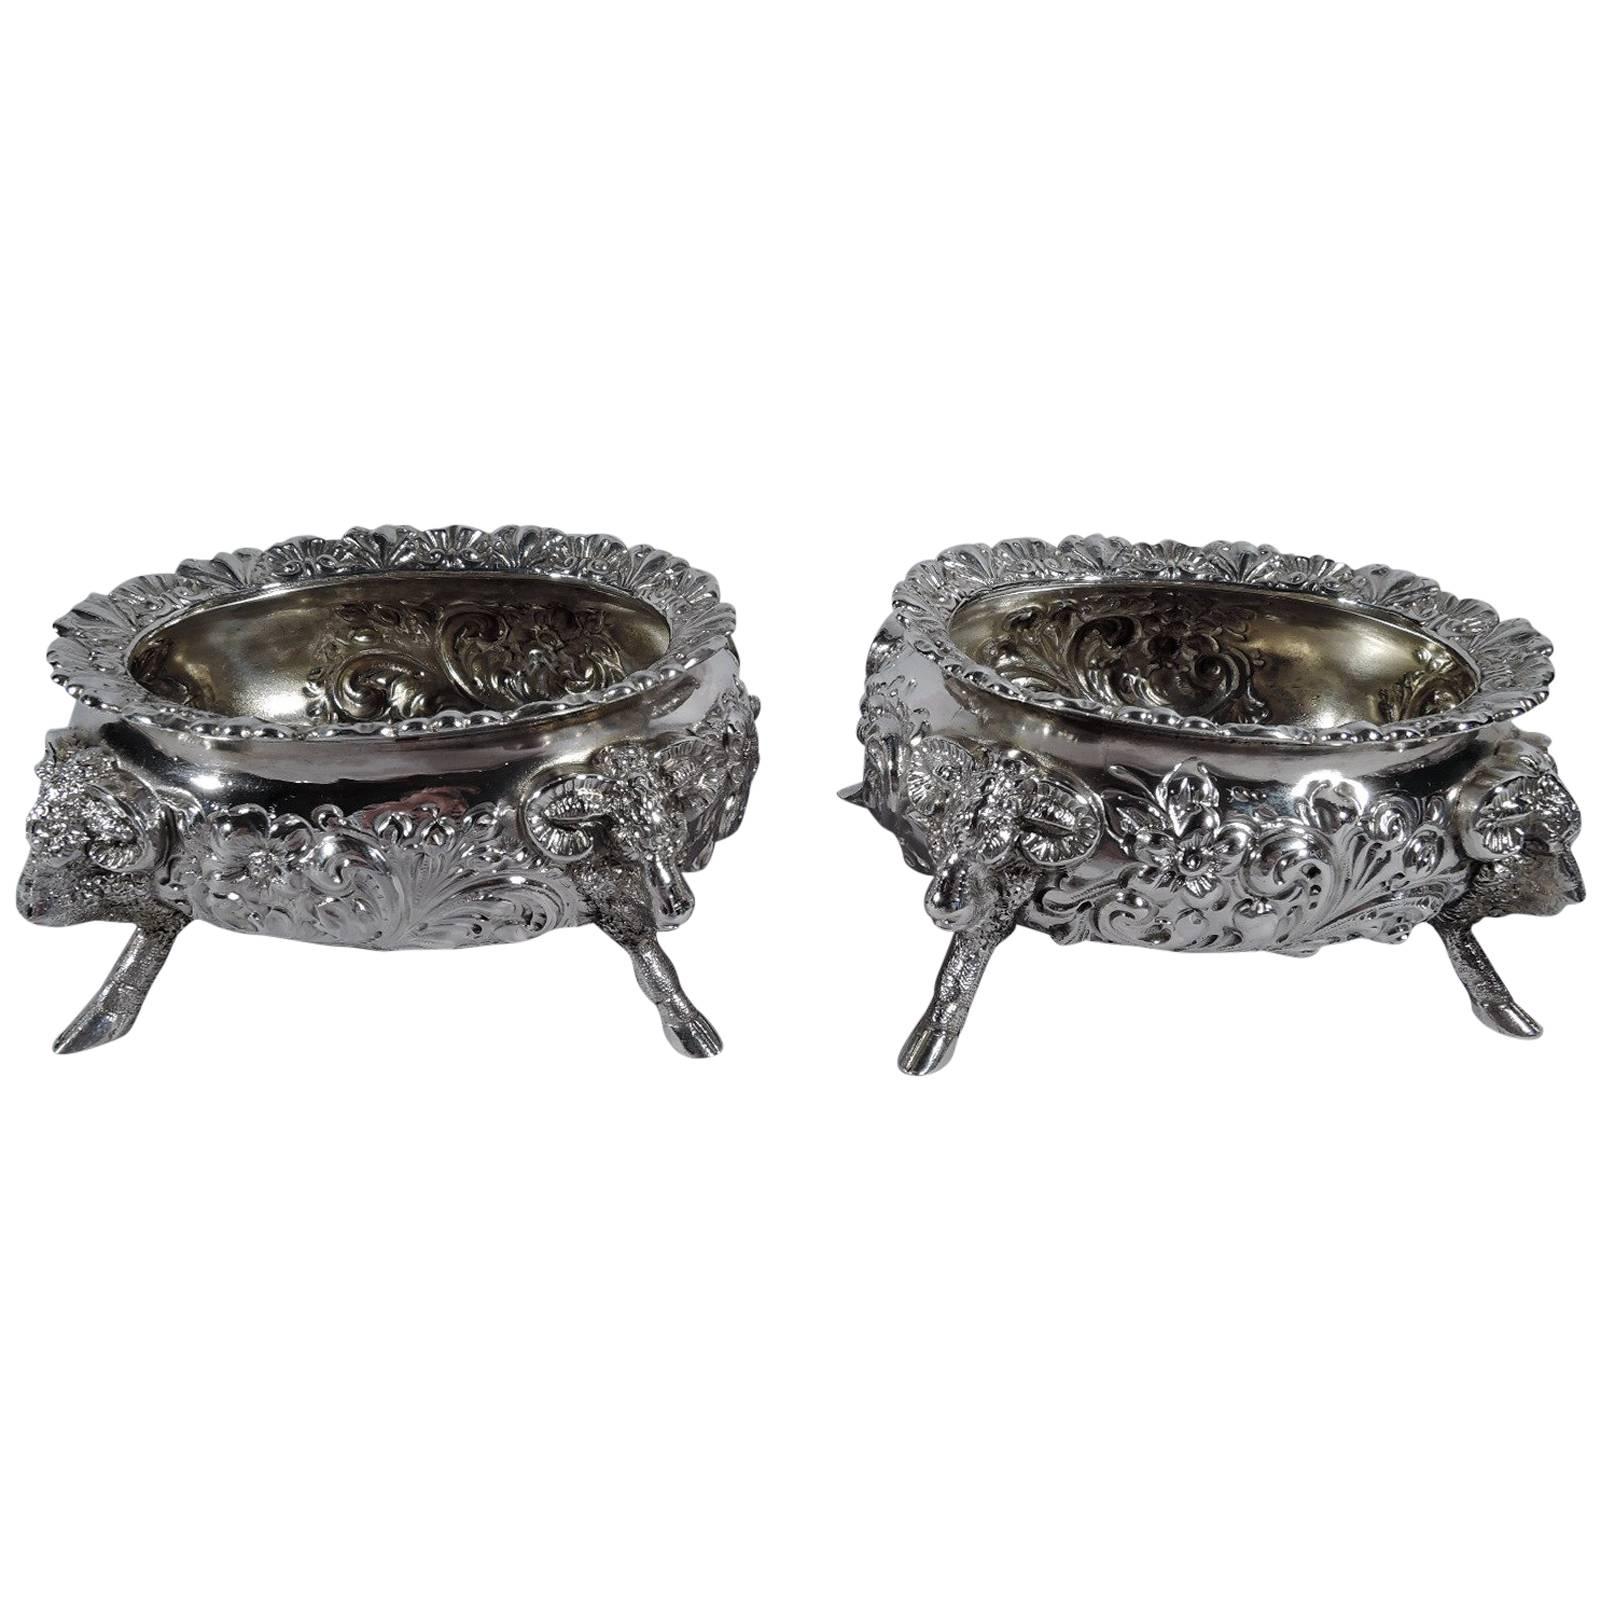 Pair of Neoclassical Style Sterling Silver Open Salts by Howard of New York